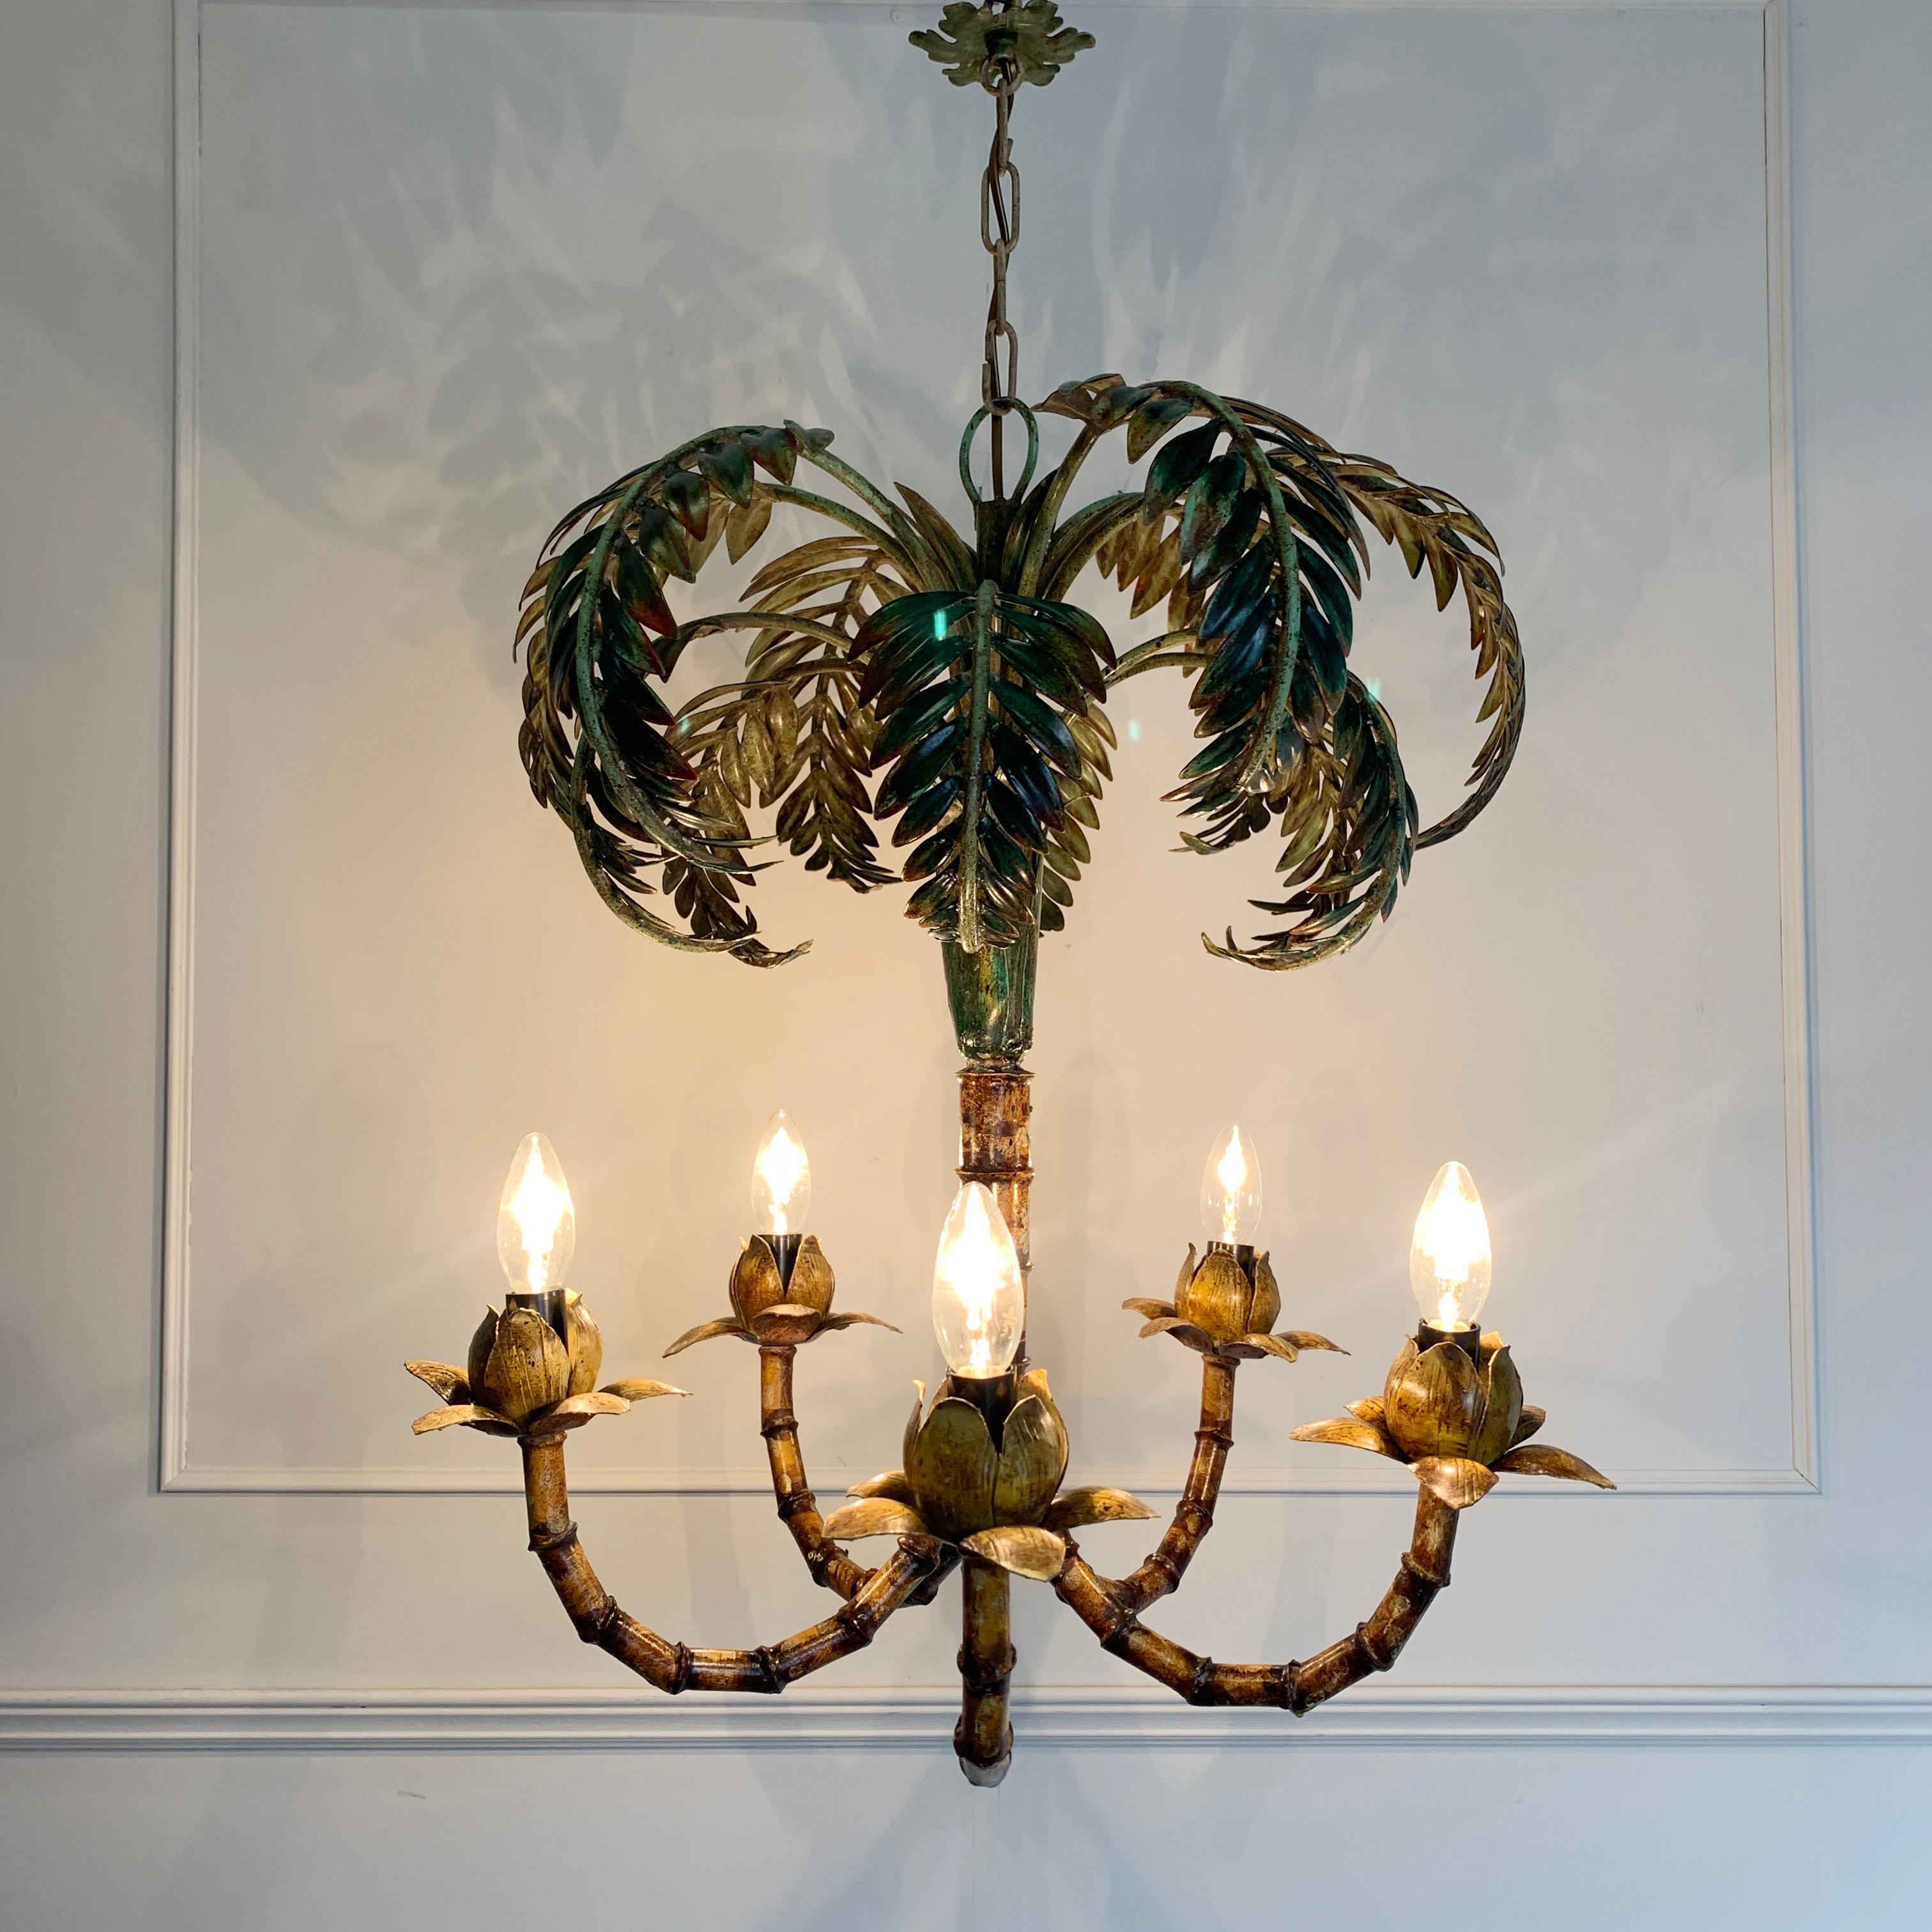 Faux bamboo palm tree chandelier
1950s, Italy
Stunning large faux bamboo palm tree tole chandelier
Fabulous original hand painted color and detailing
5 arms with single bulb holder to each, E14 small screw in bulbs
Original chain and metal ceiling